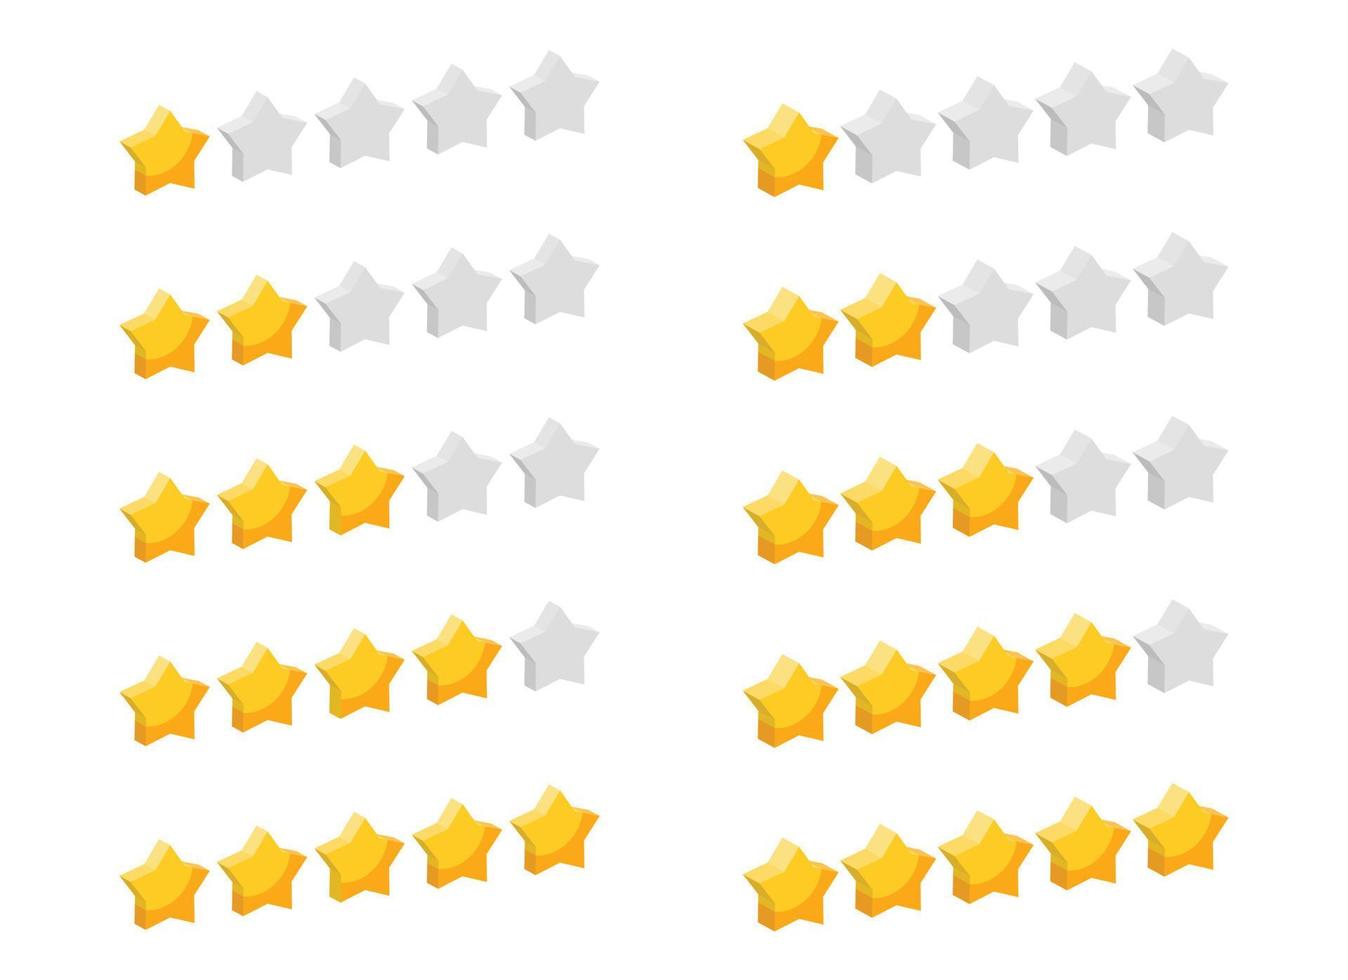 Star rating review from zero to five. Customer feedback 3D vector